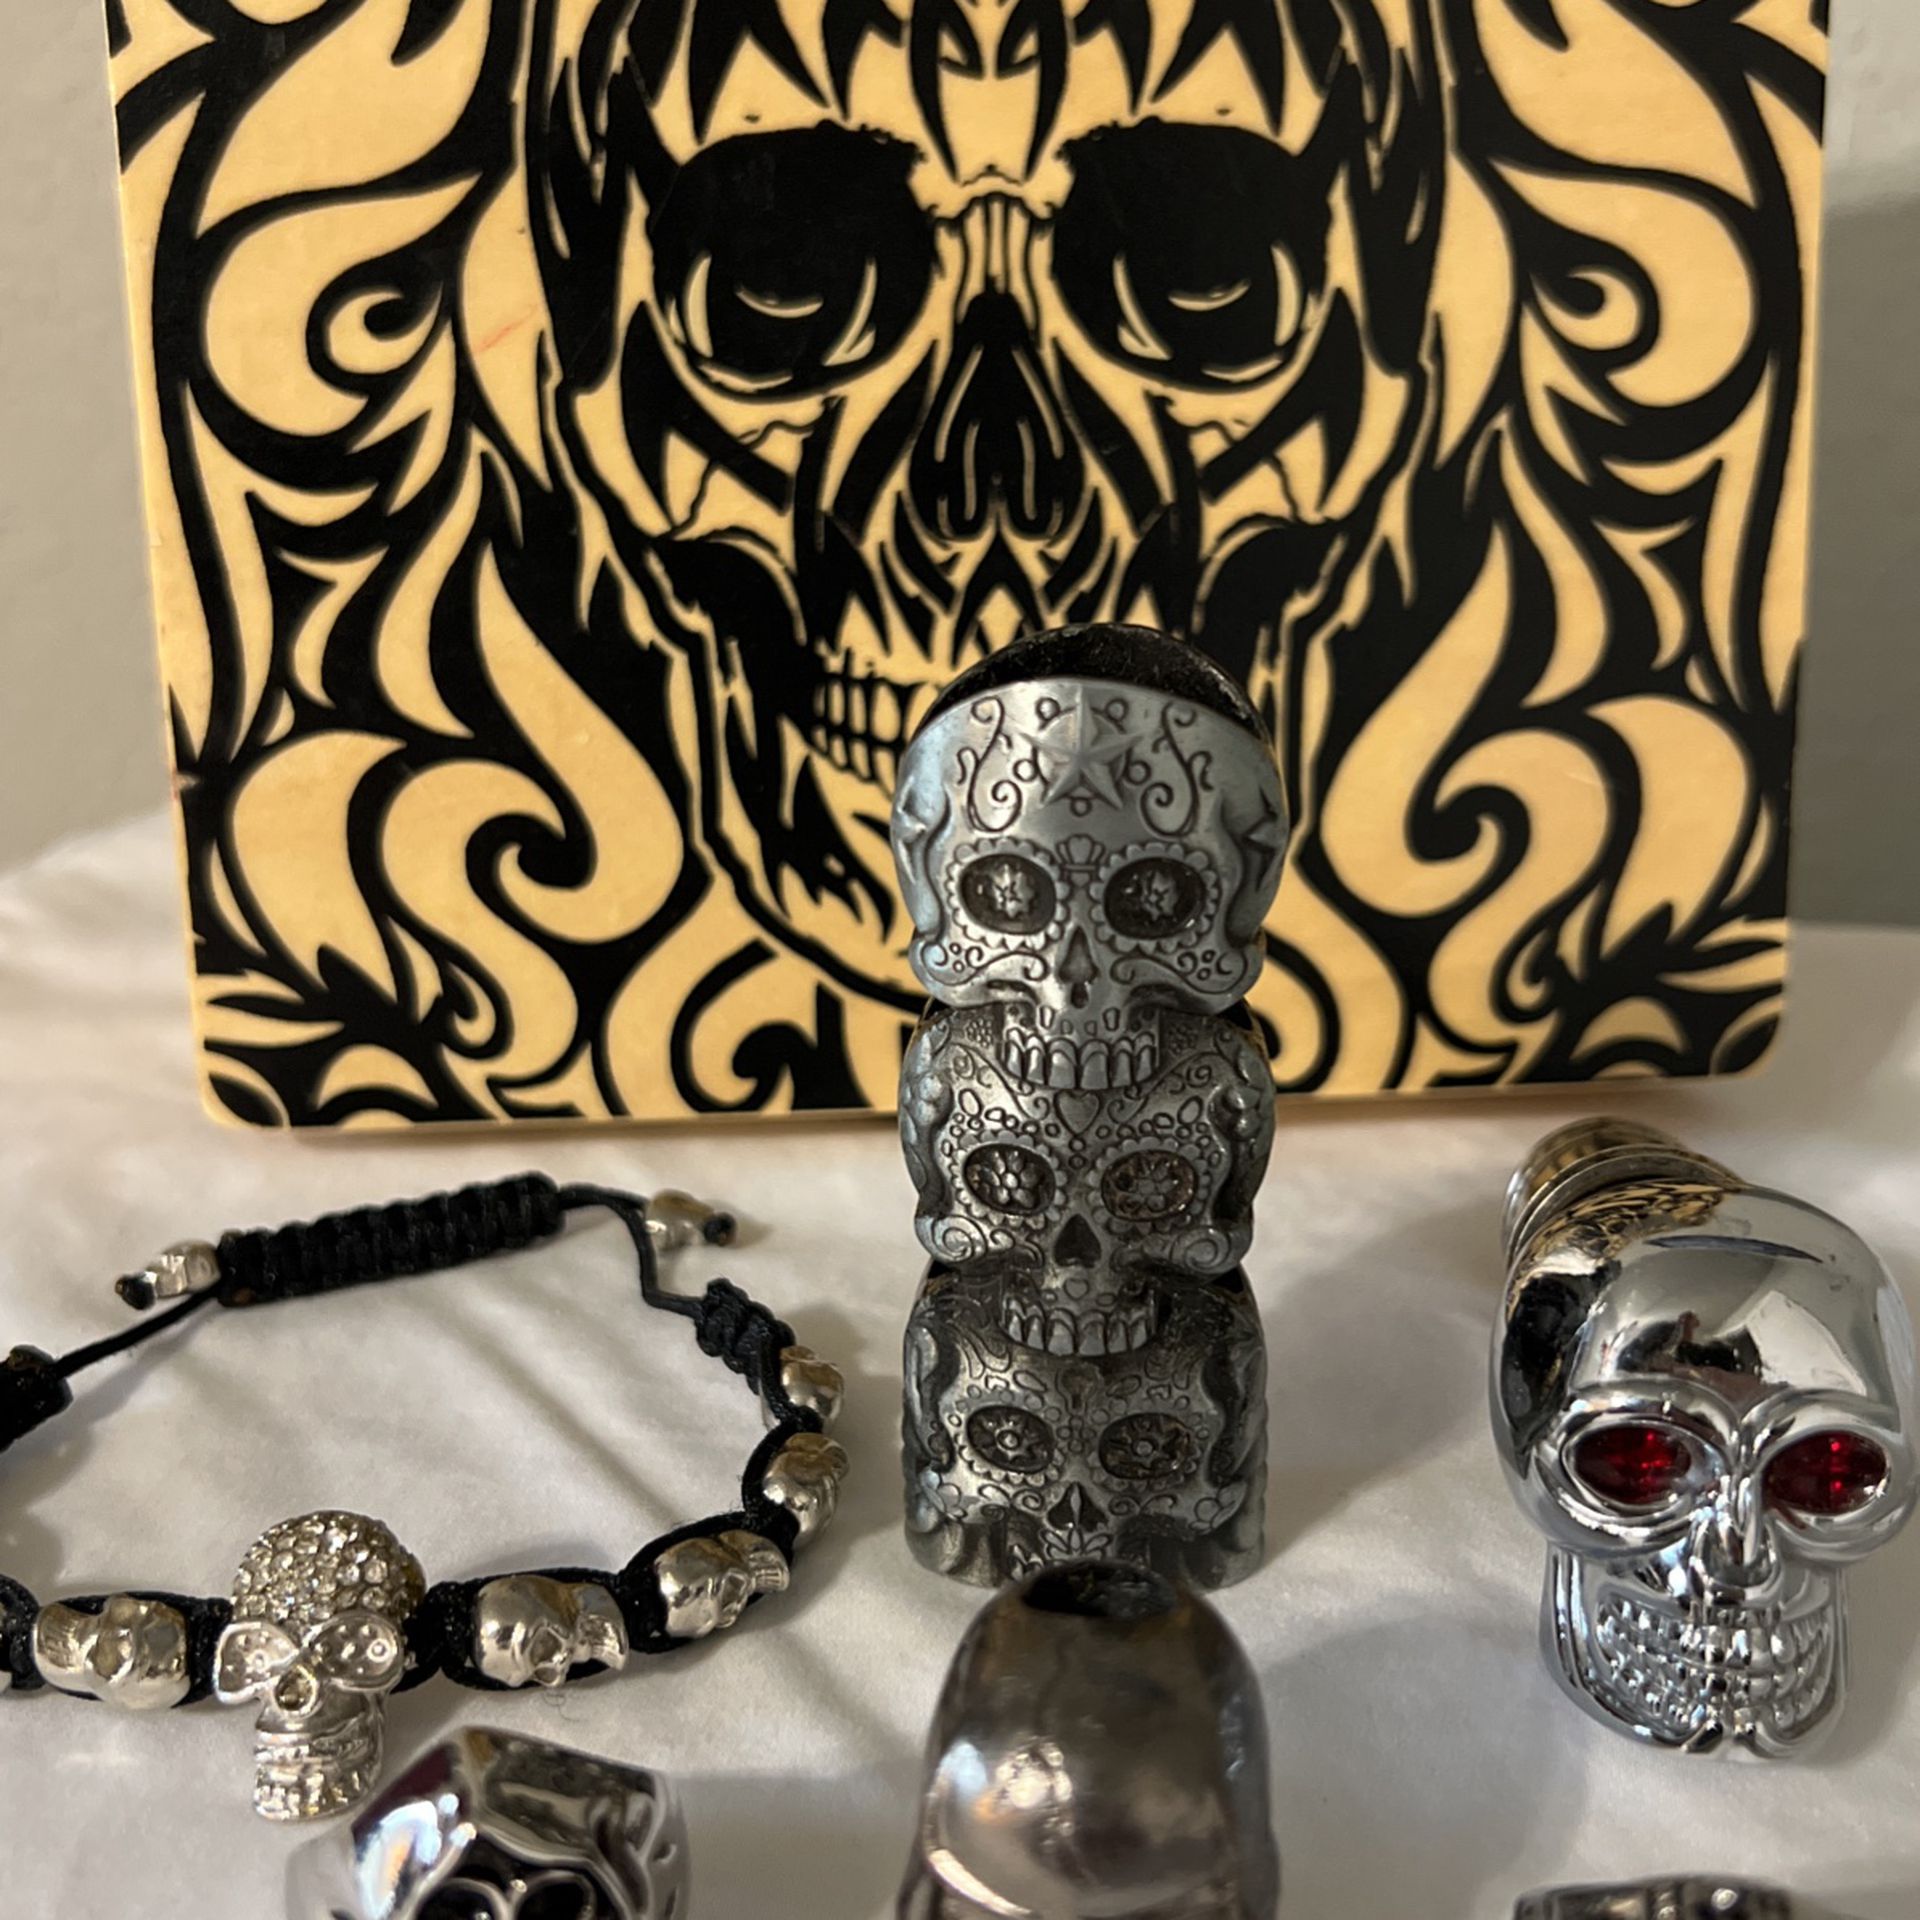 Jewelry And Skull Misc. Items